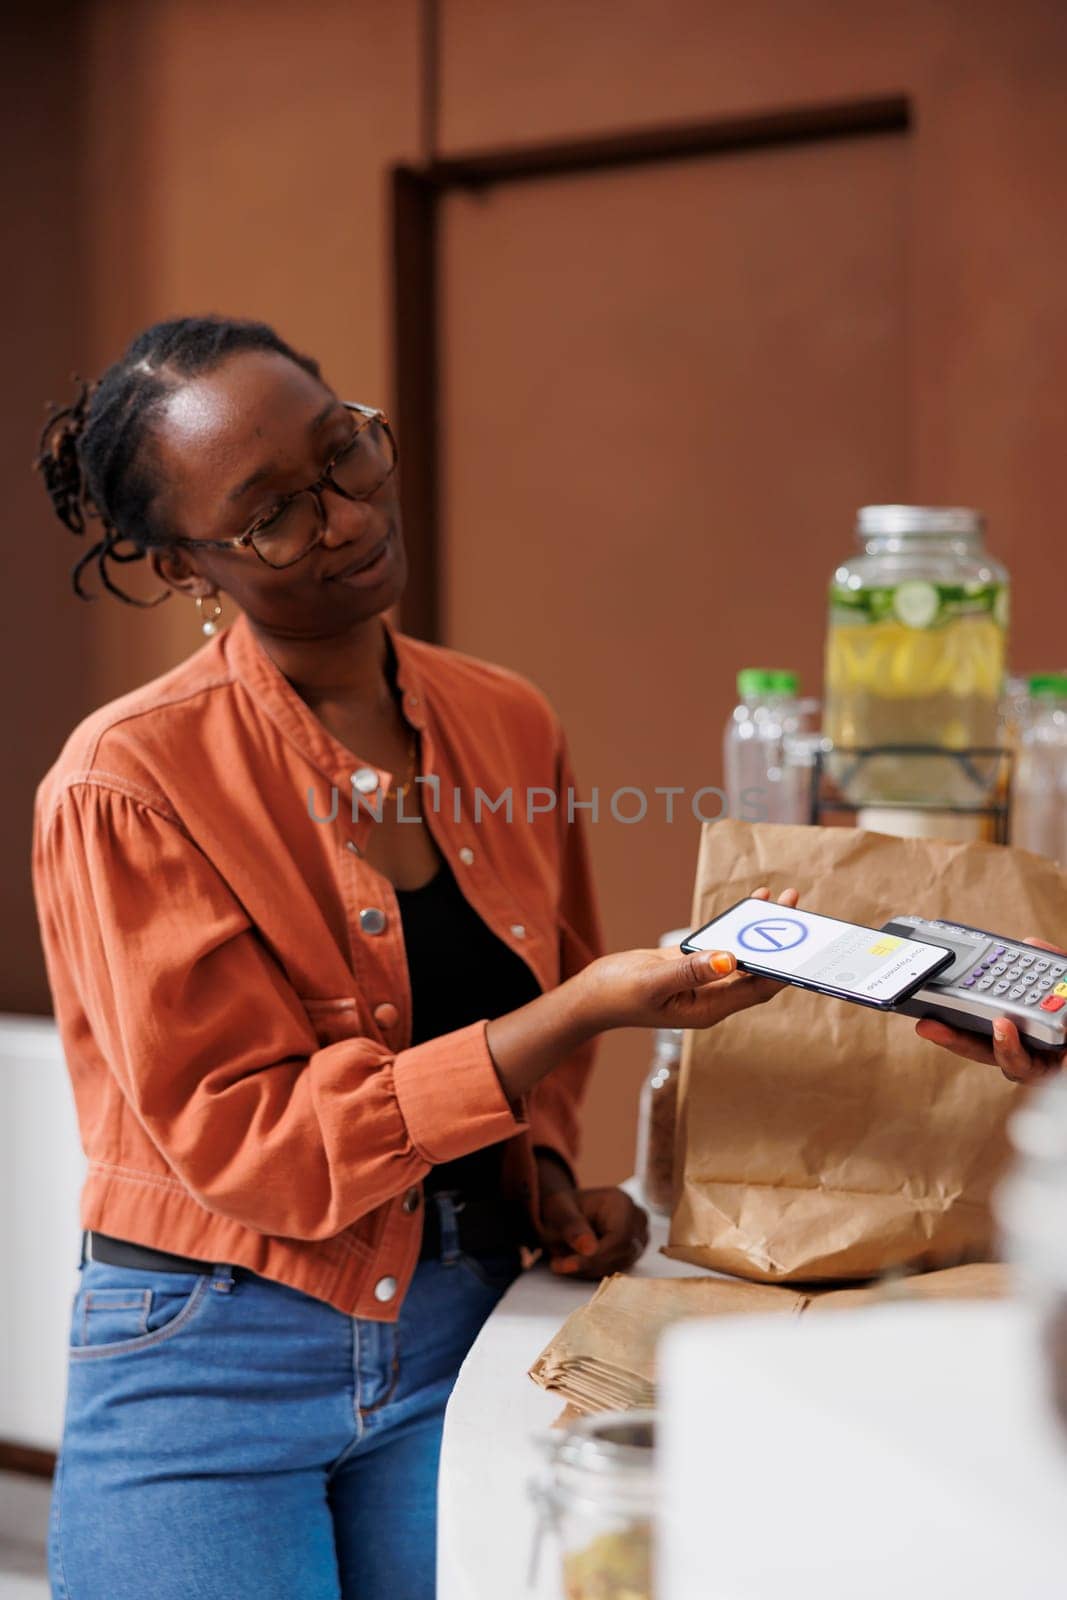 African American woman pays for her bio food using contactless payment on her mobile device. She holds a smartphone and supports cashless transactions at the locally grown market.